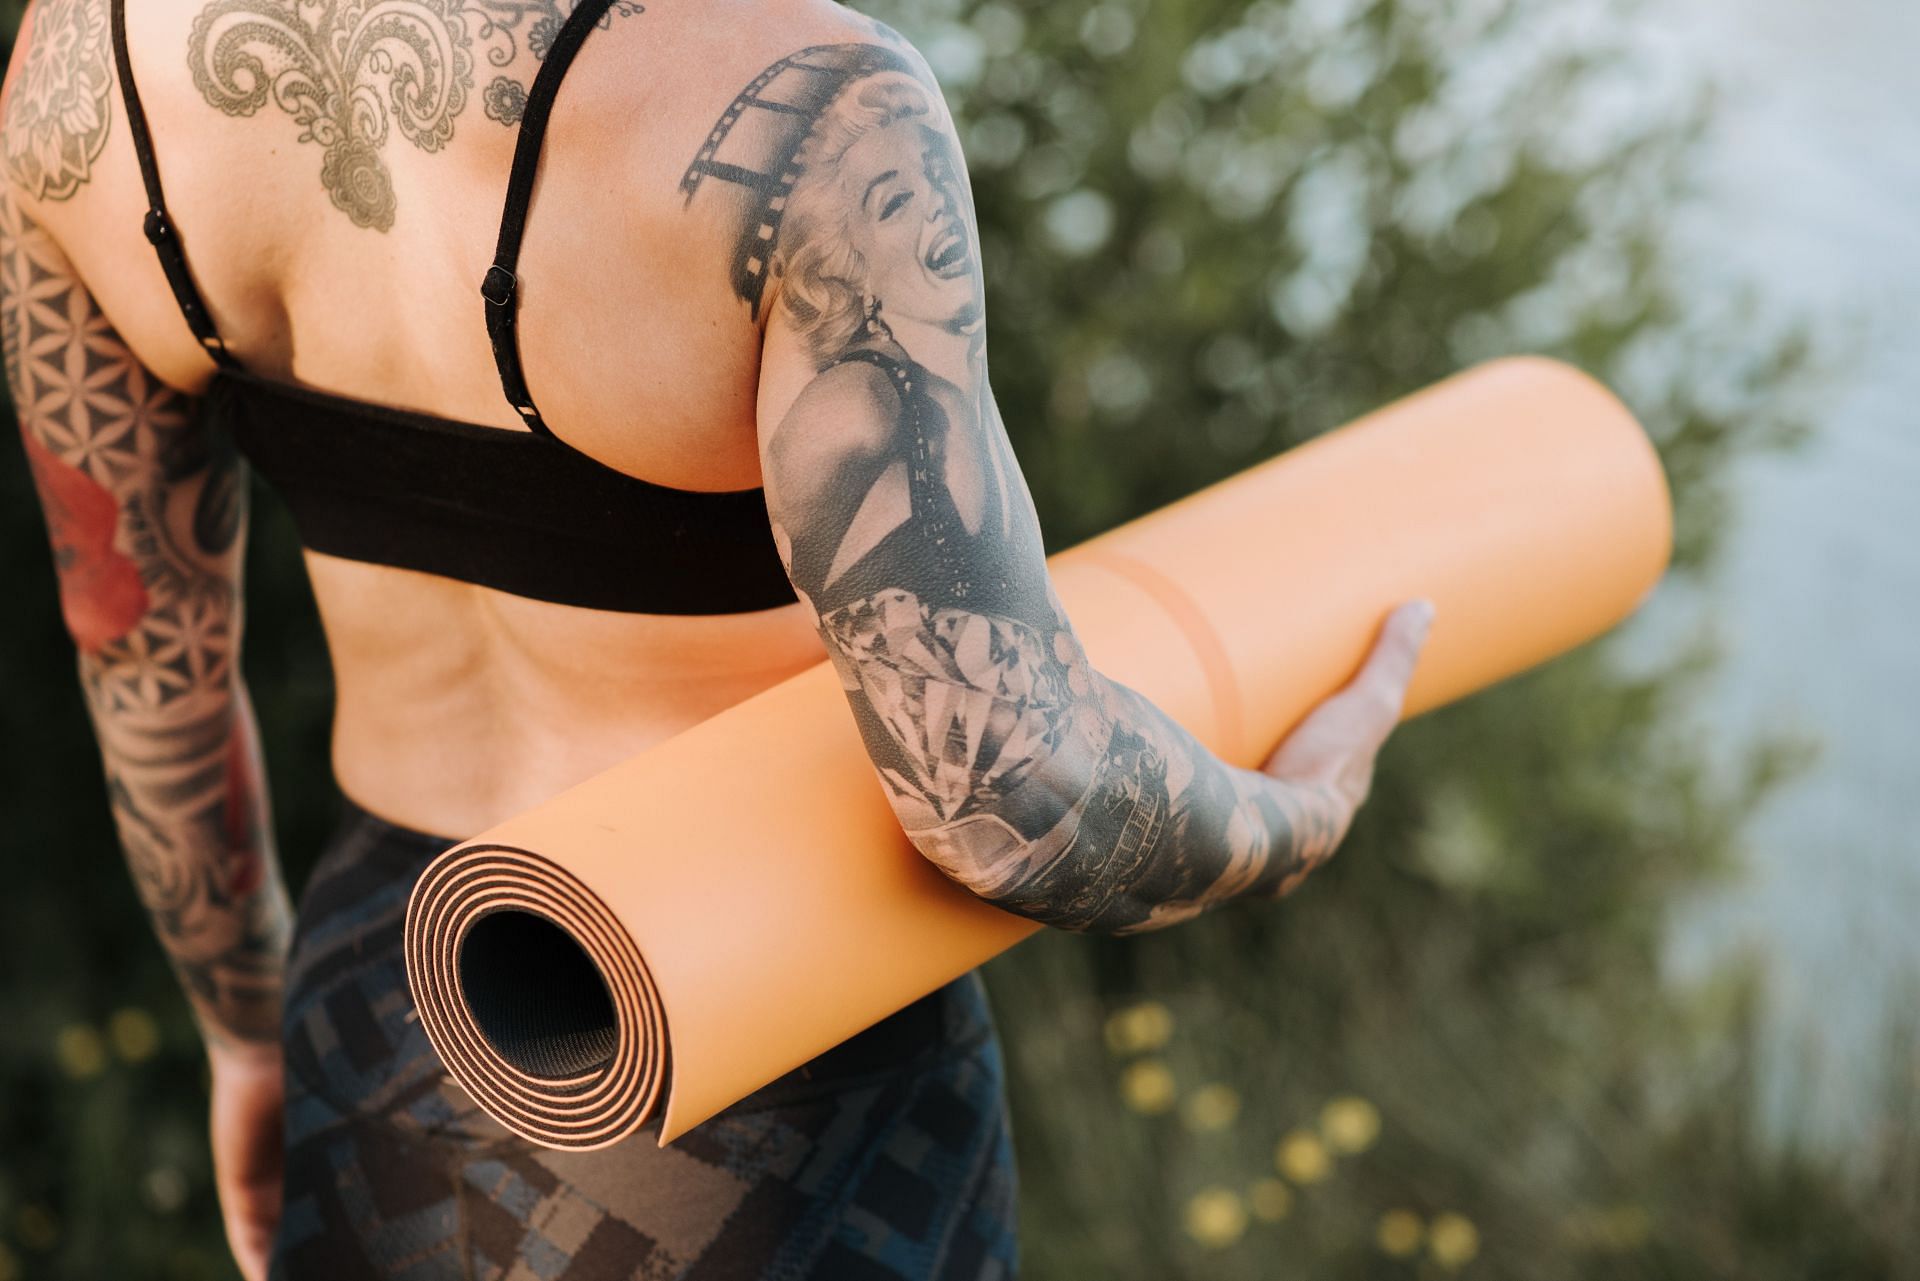 Pelvic curl helps in strengthening your abdominal muscles. (Image via Pexels / Anete Lusina)